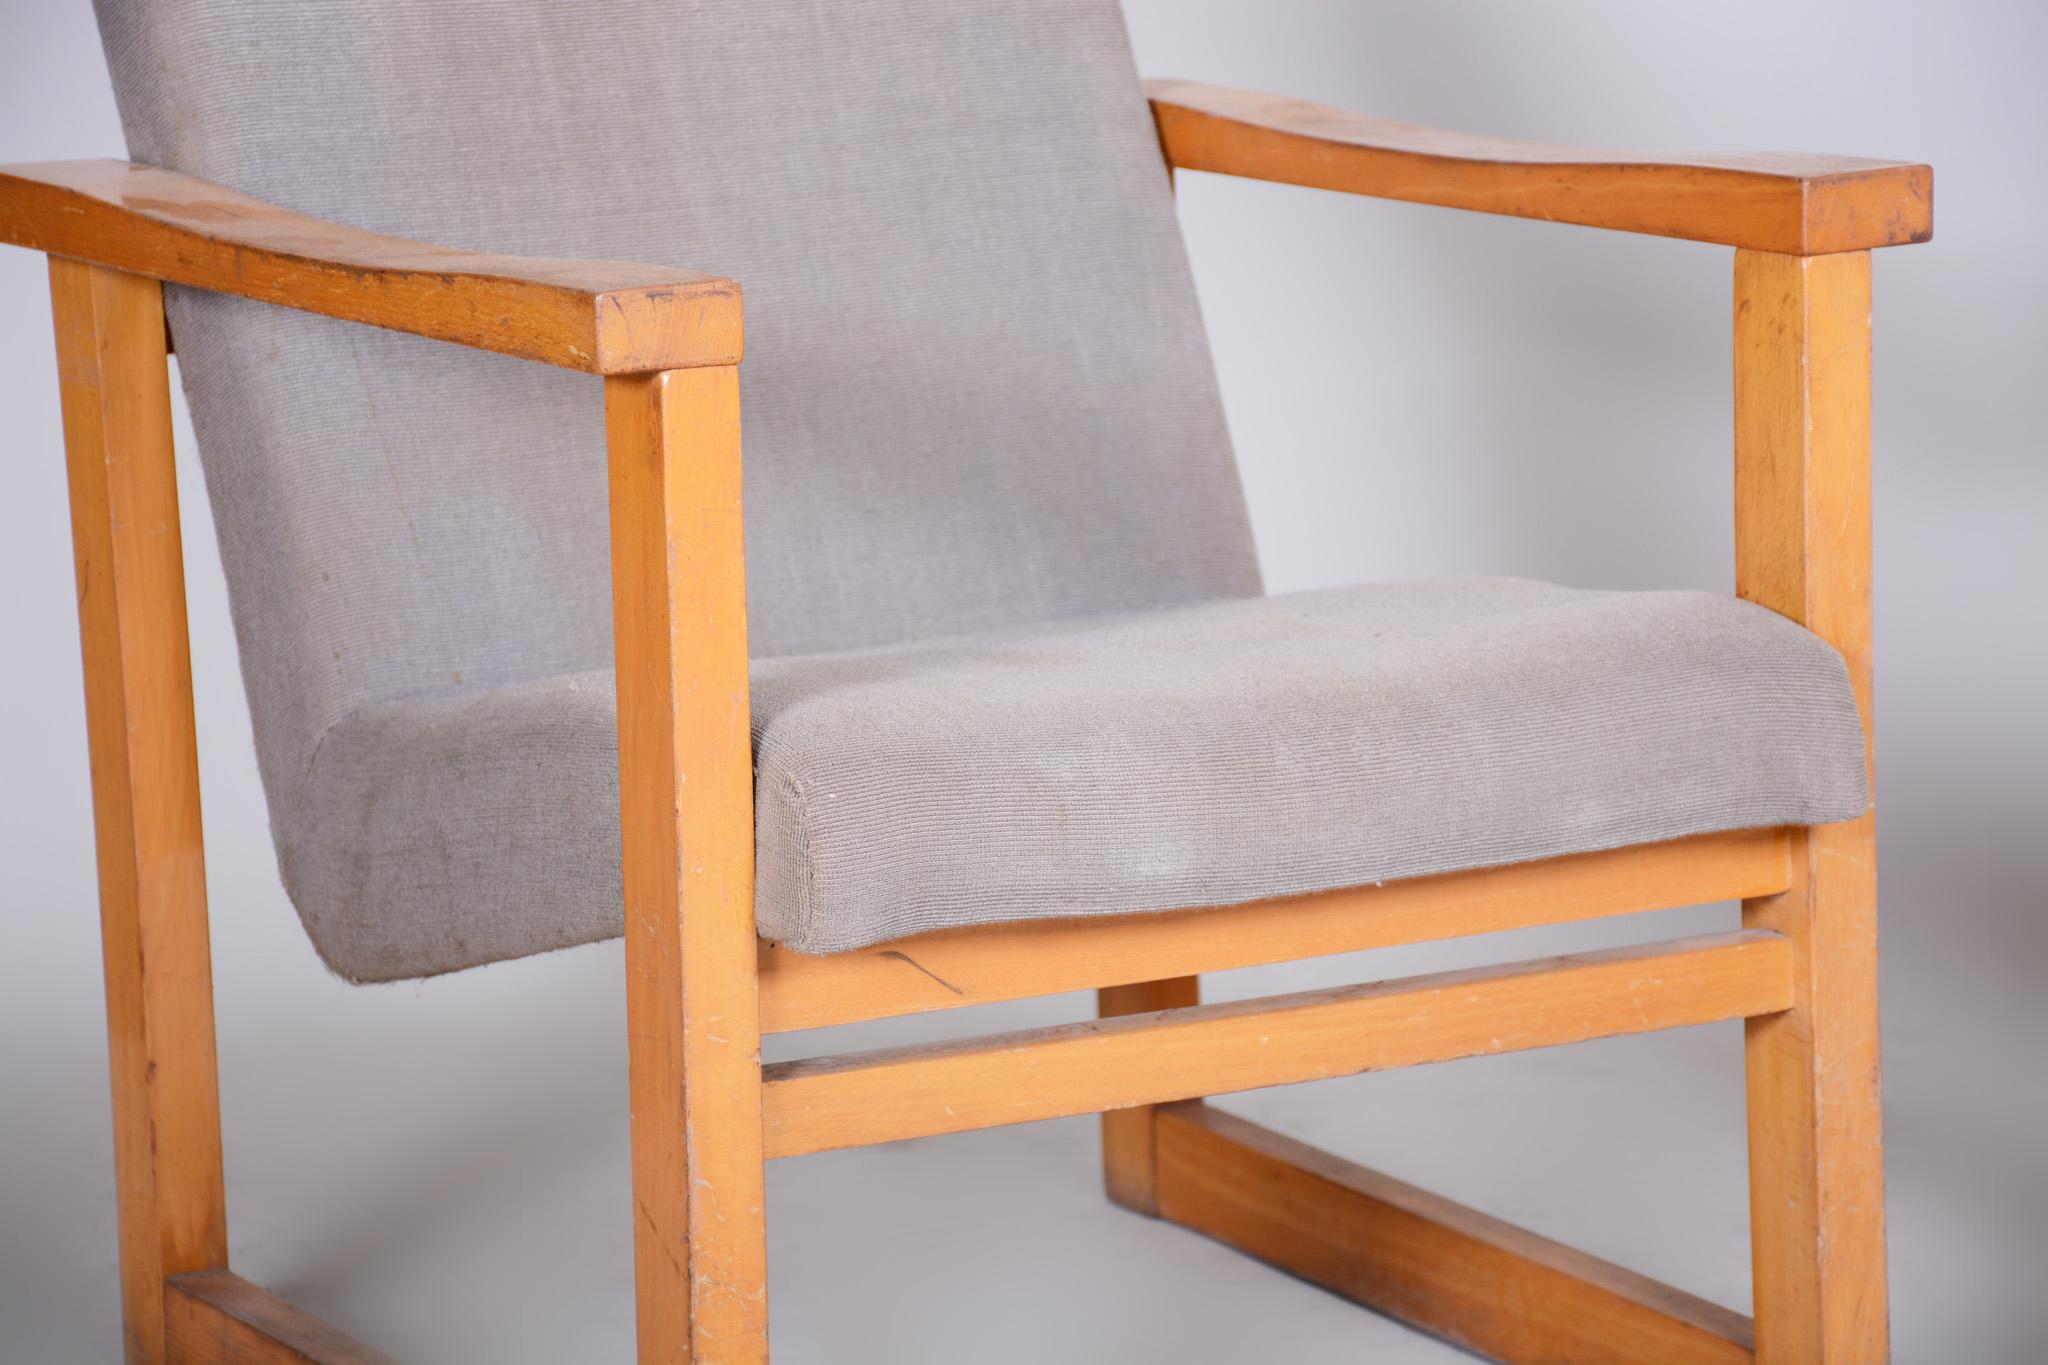 20th Century, Beige Pair of Maple Armchairs, Original Condition, Czechia, 1960s For Sale 3